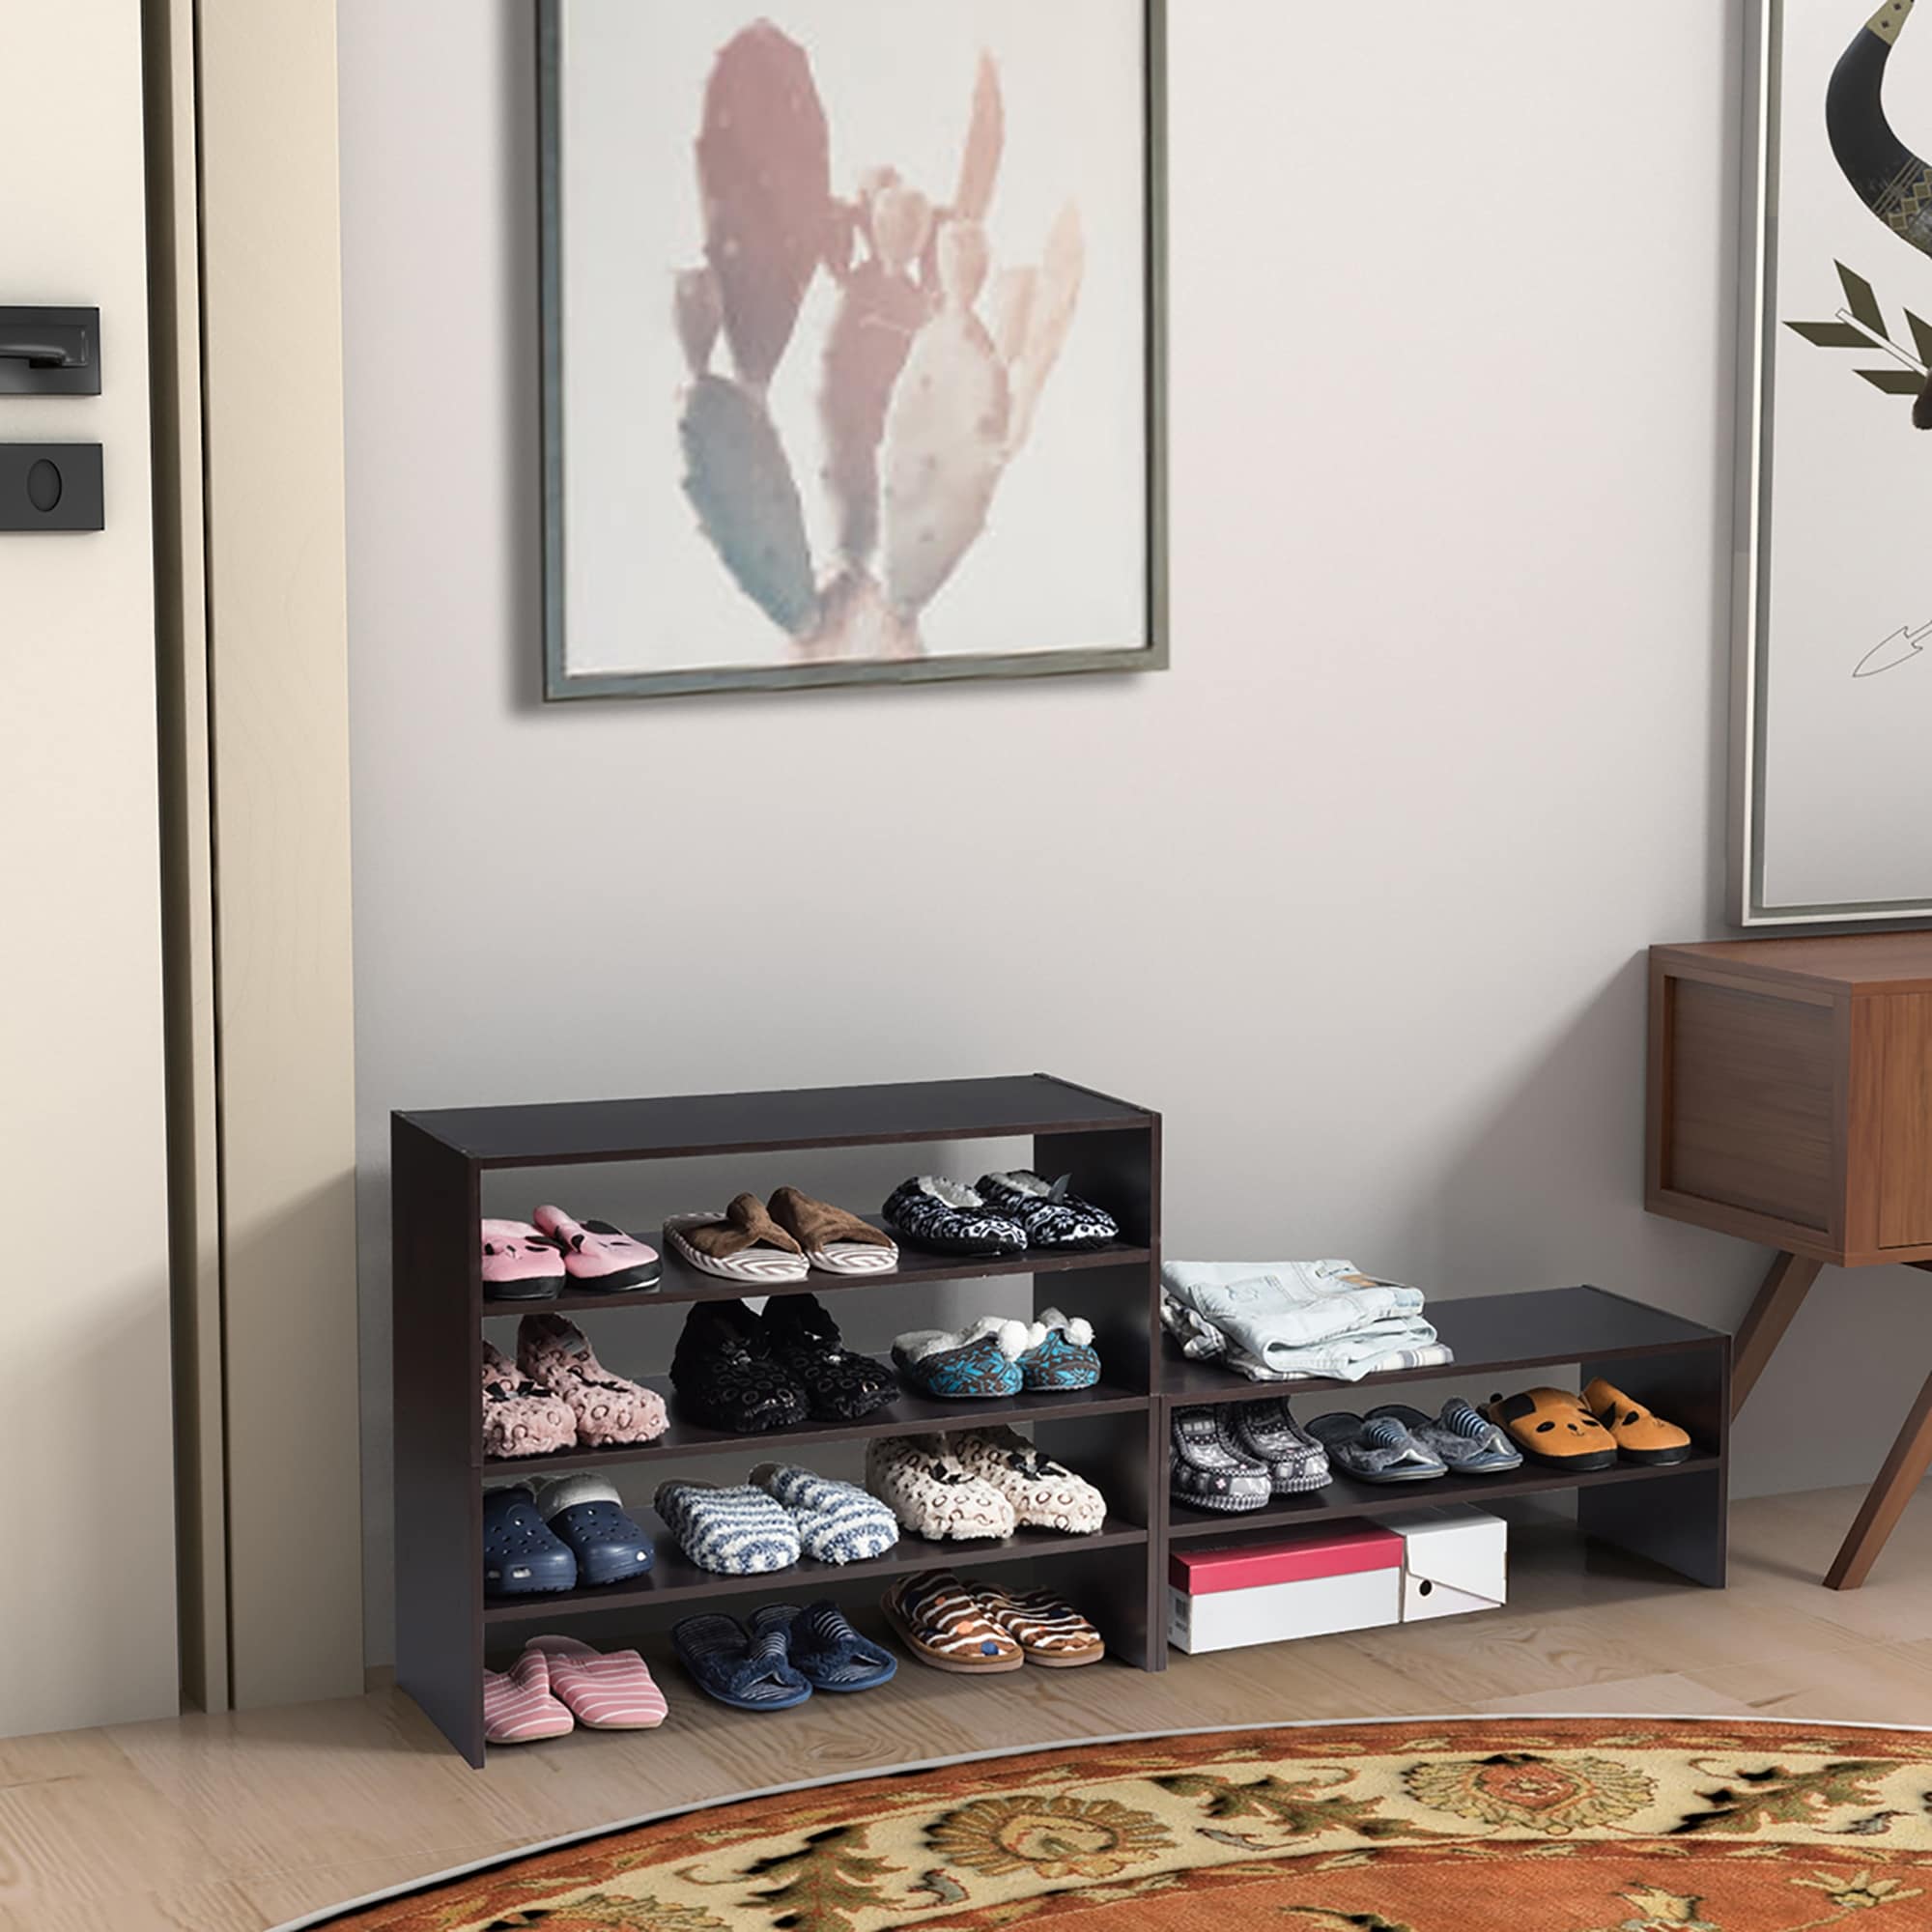 https://ak1.ostkcdn.com/images/products/is/images/direct/d37ac7aee67495895ba3f4acd5e715e4c6d3b6b1/Costway-3-PCS-Stackable-Shoe-Rack-31-Inch-Horizontal-Organizer-2-tier.jpg